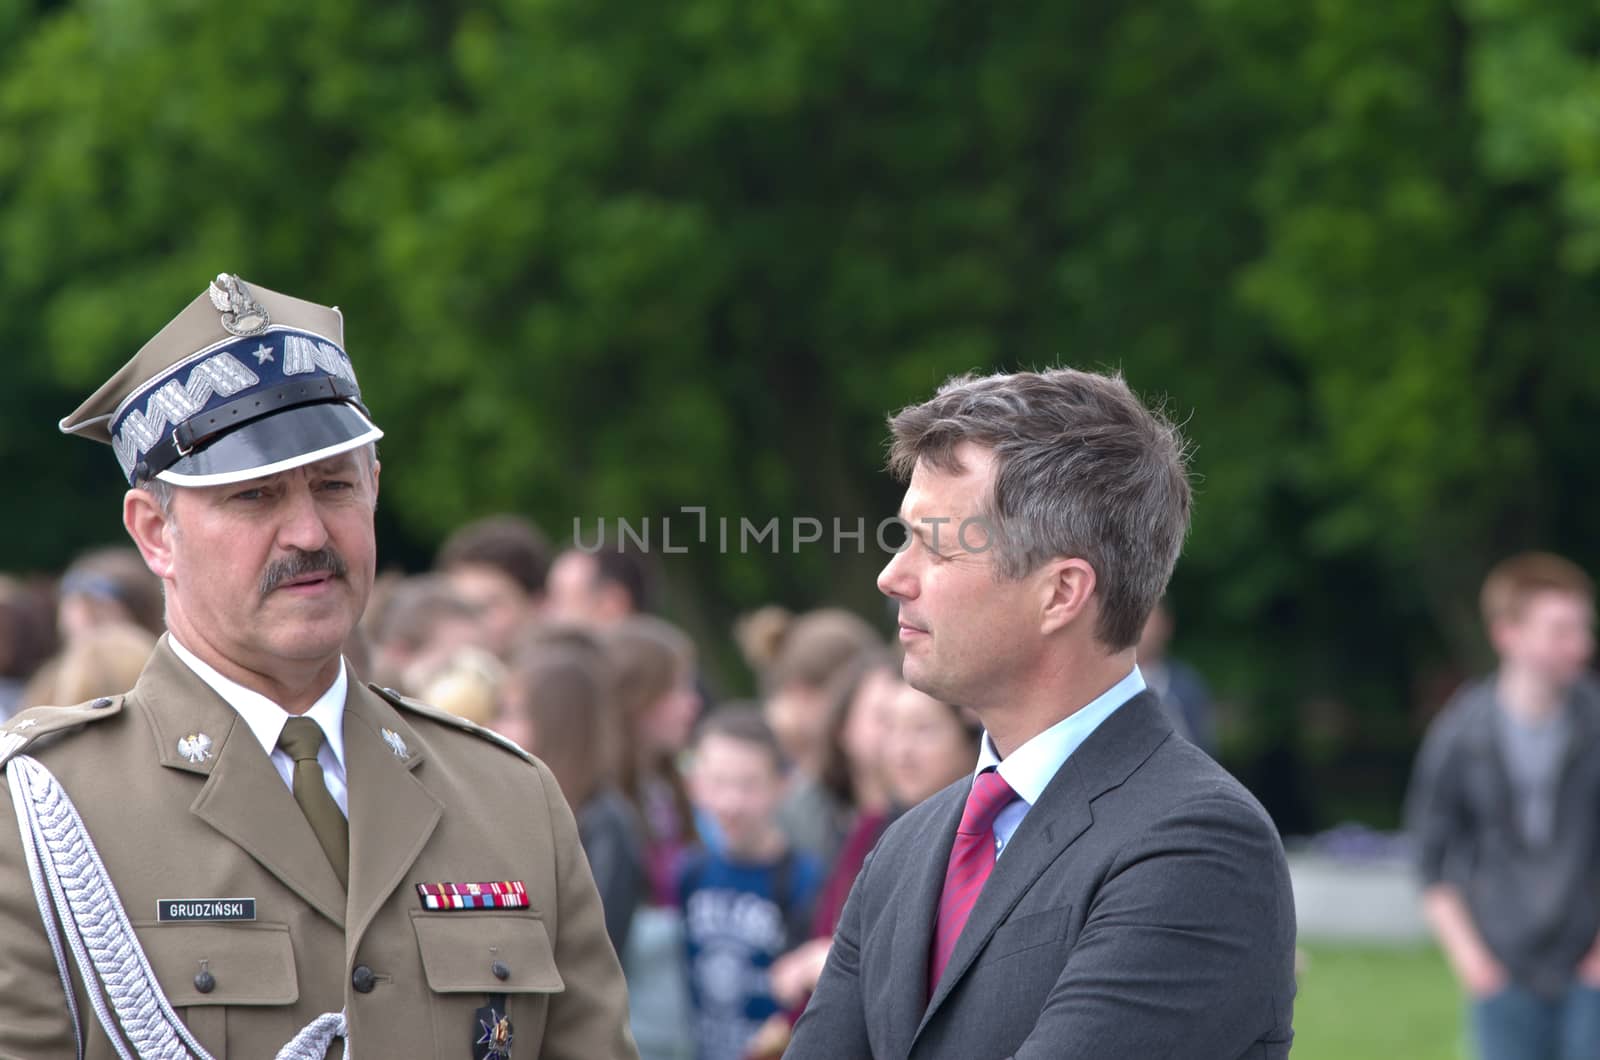 Warsaw, Poland - May 12, 2014: Danish Crown Prince Couple on state visit to Poland. Crown Prince Frederik talks with Polish general after the wreath laying ceremony.